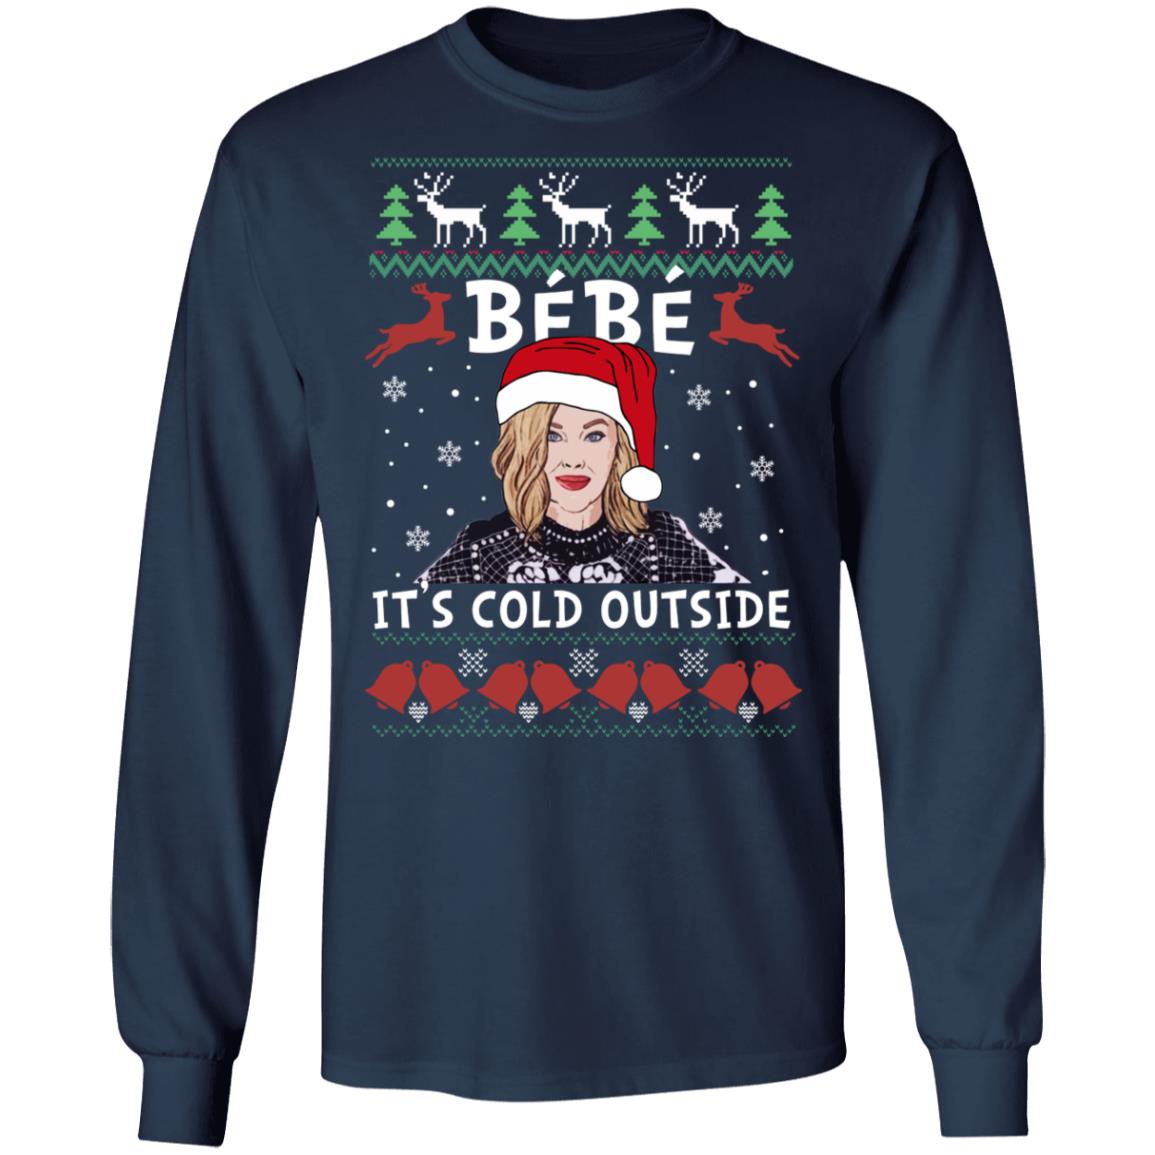 Moira Rose Bebe It’s Cold Outside Christmas Sweater | Teemoonley.com